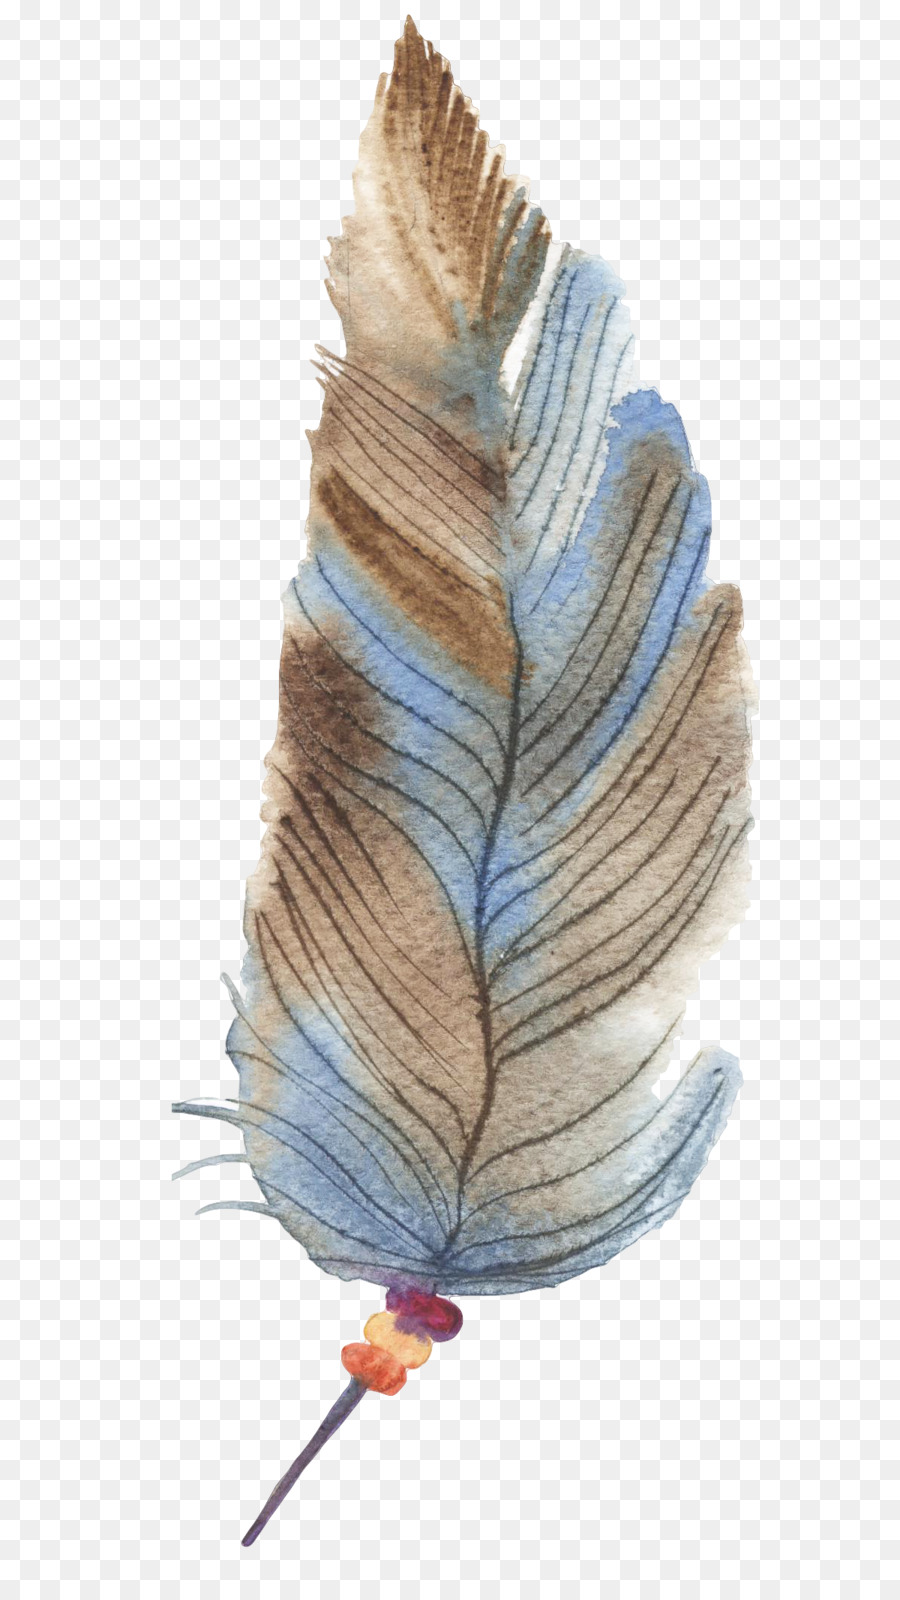 Feather Drawing - Hand-painted feathers png download - 1200*2132 - Free Transparent Feather png Download.